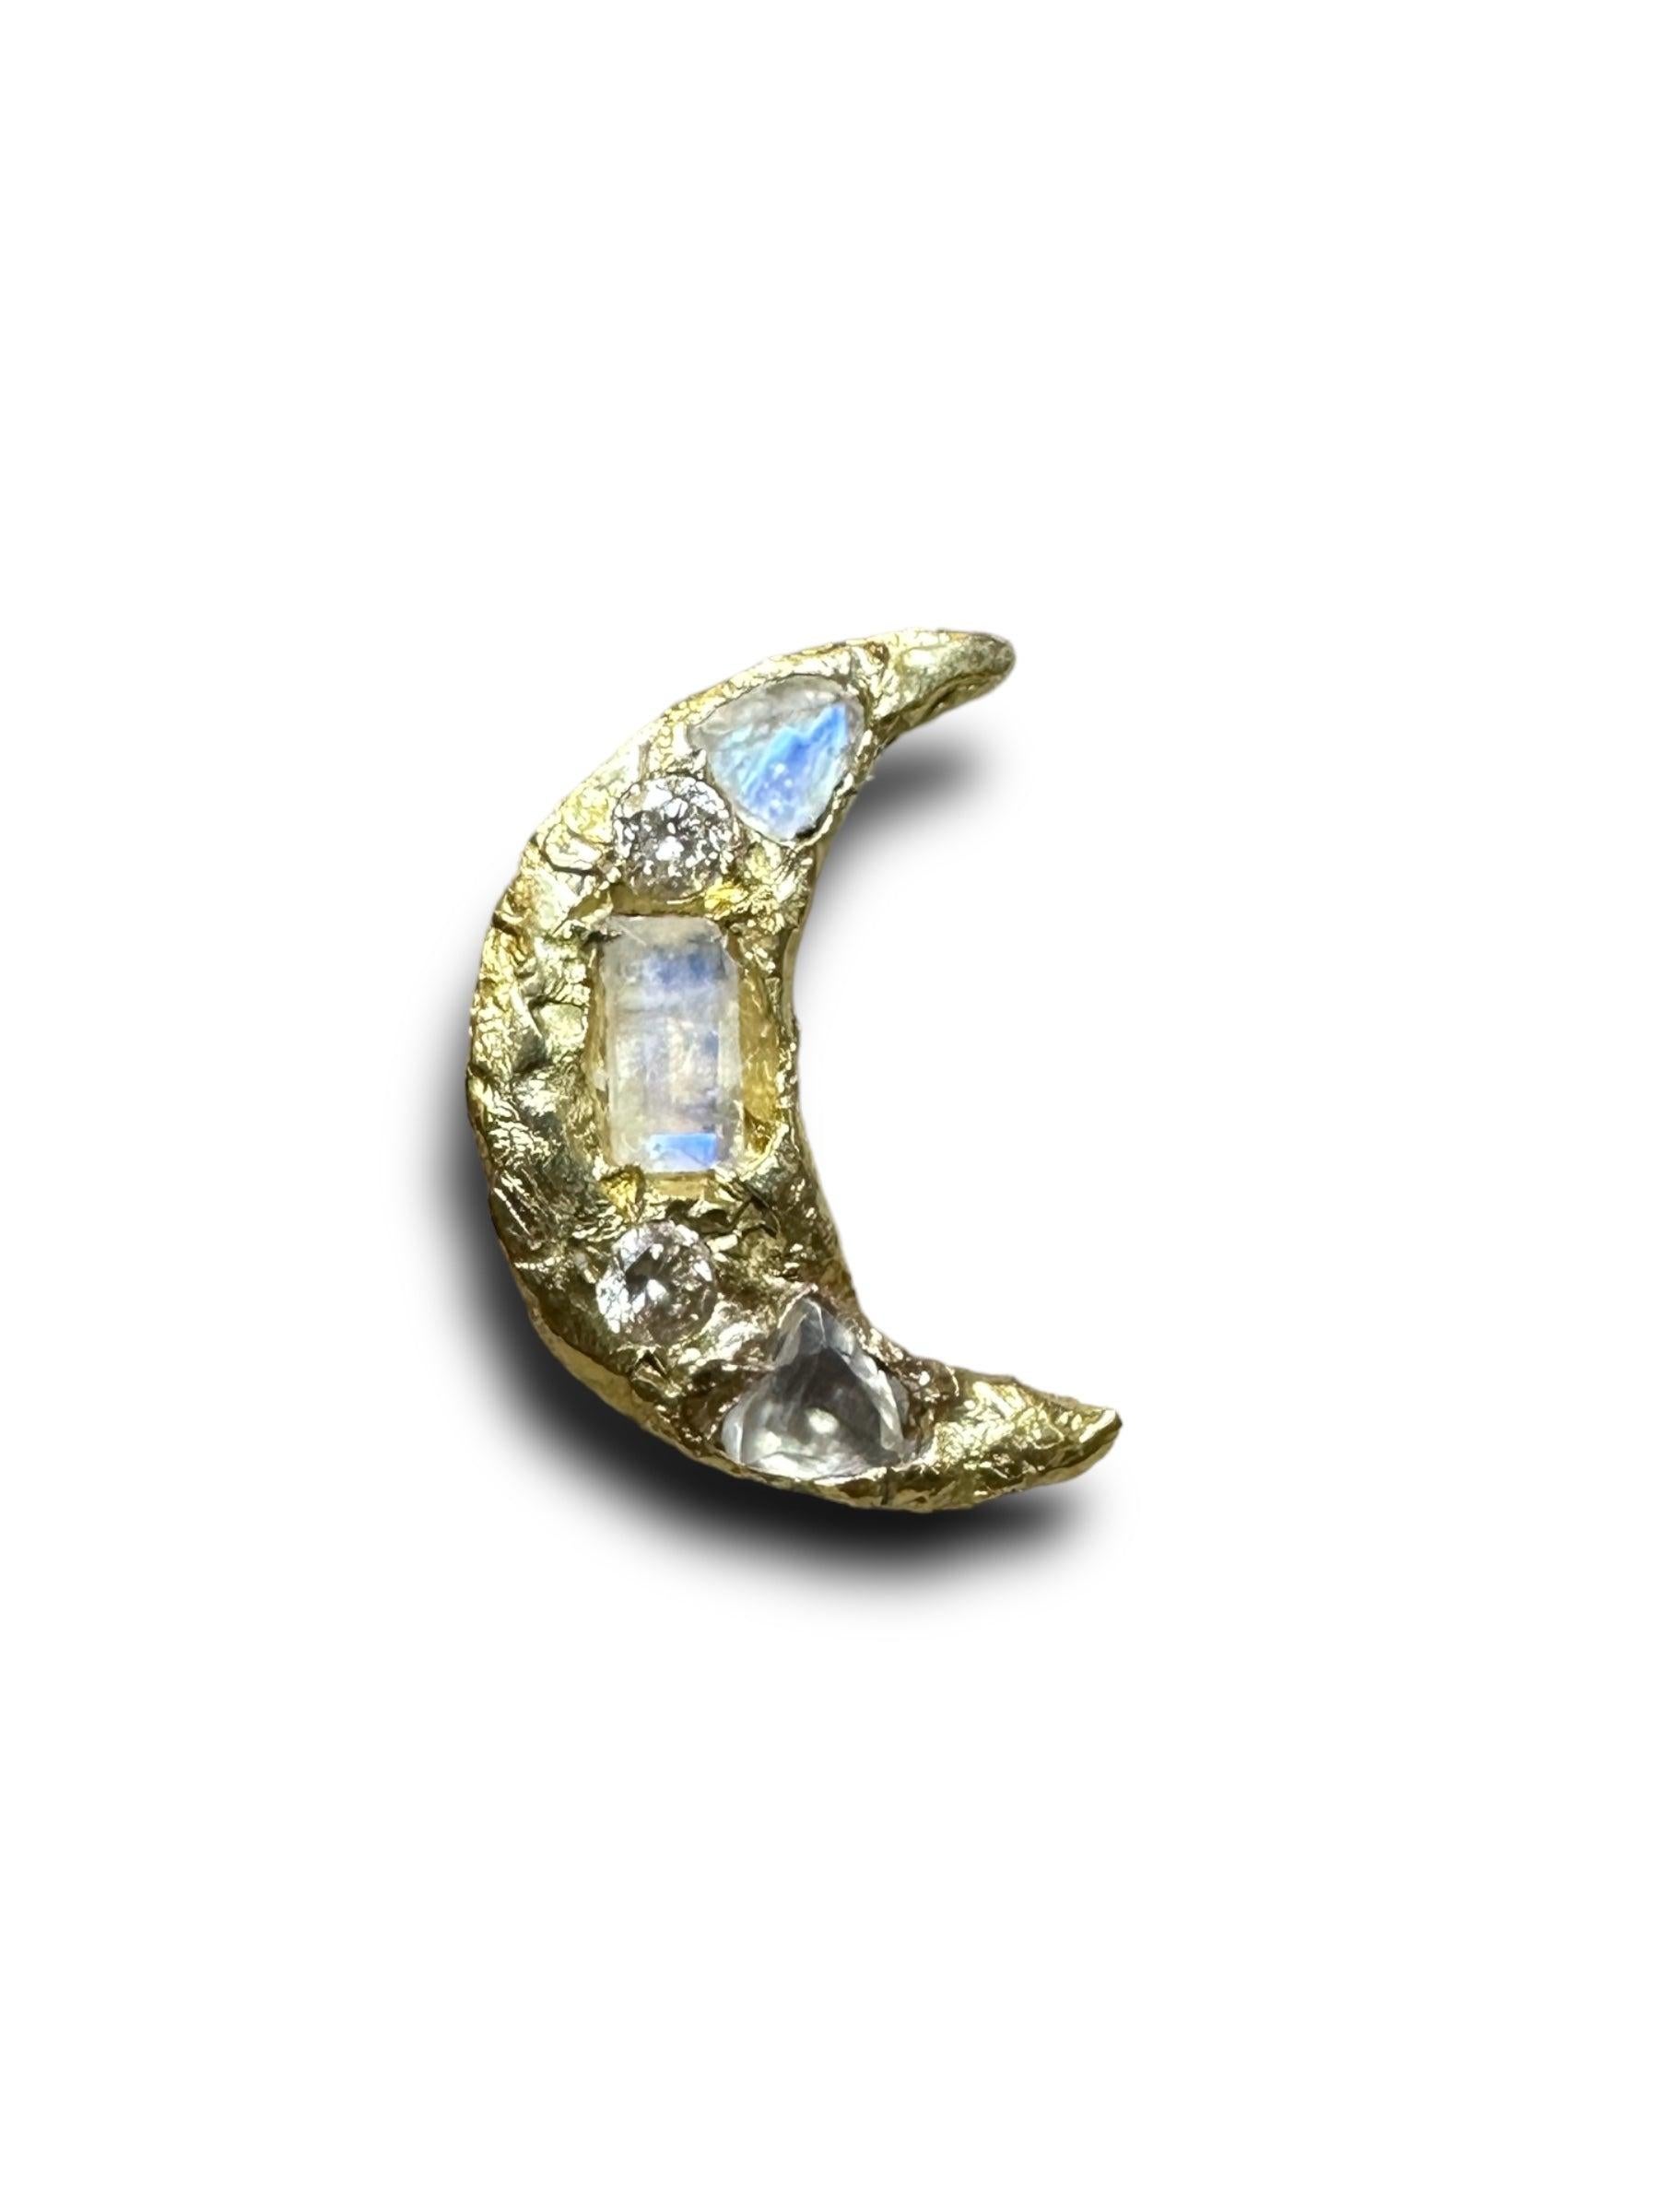 Moon Crescent stud Earrings Diamonds Moonstones in Gold one of a kind in stock For Sale 2